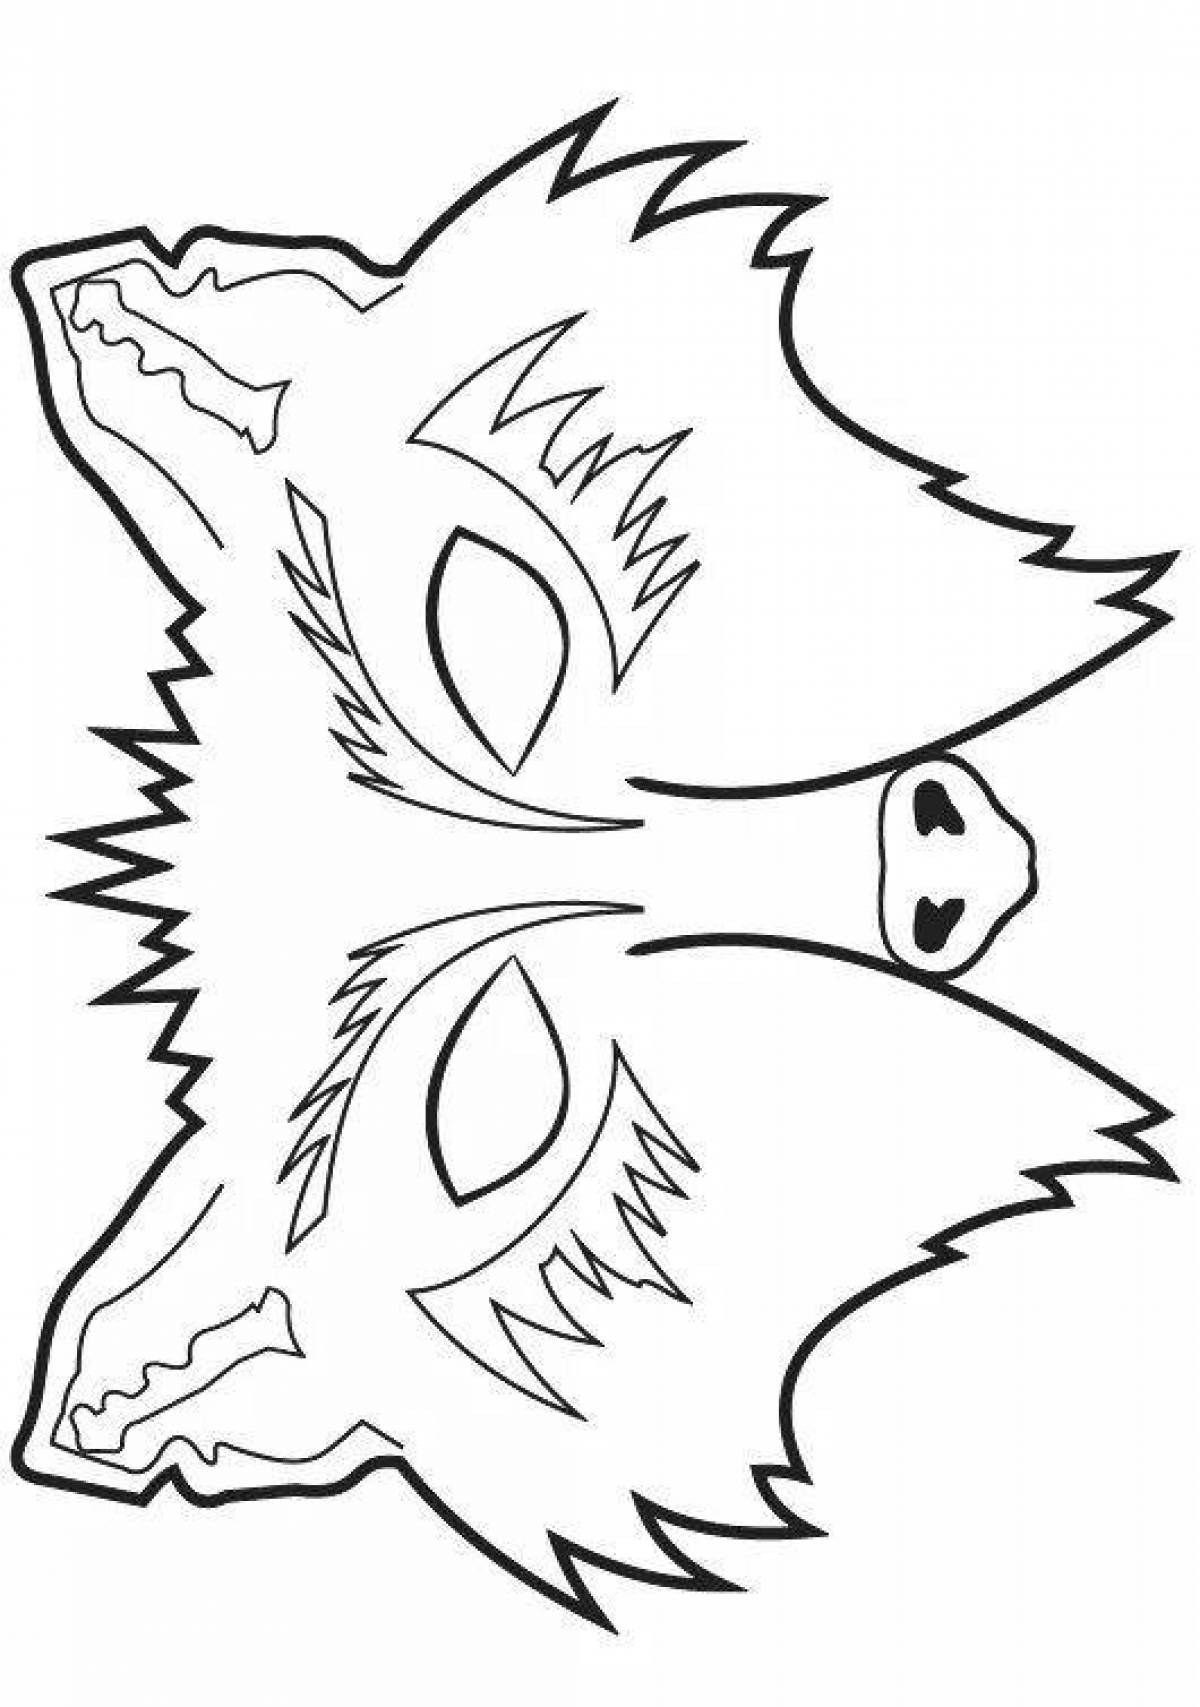 Coloring wolf mask